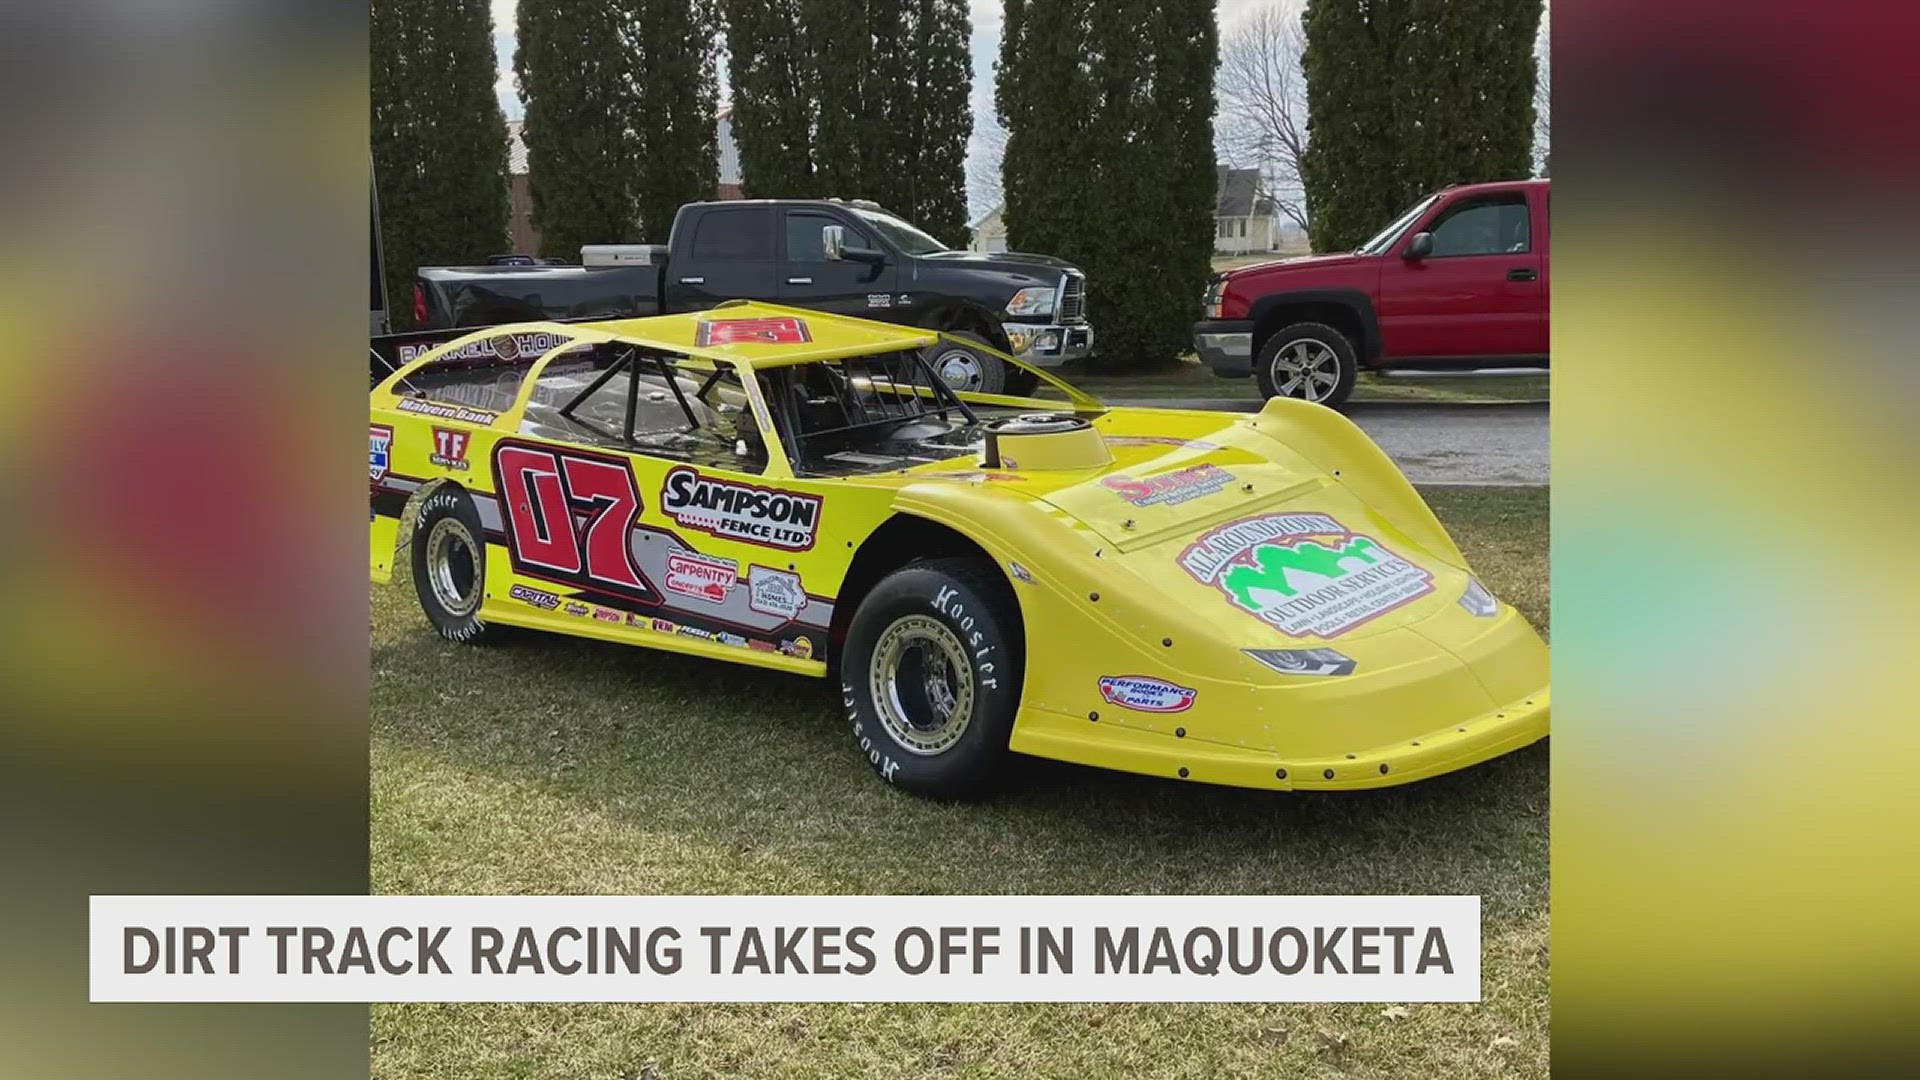 The Maquoketa Speedway is hosting the biggest dirt track race in the Midwest on Friday and Saturday.